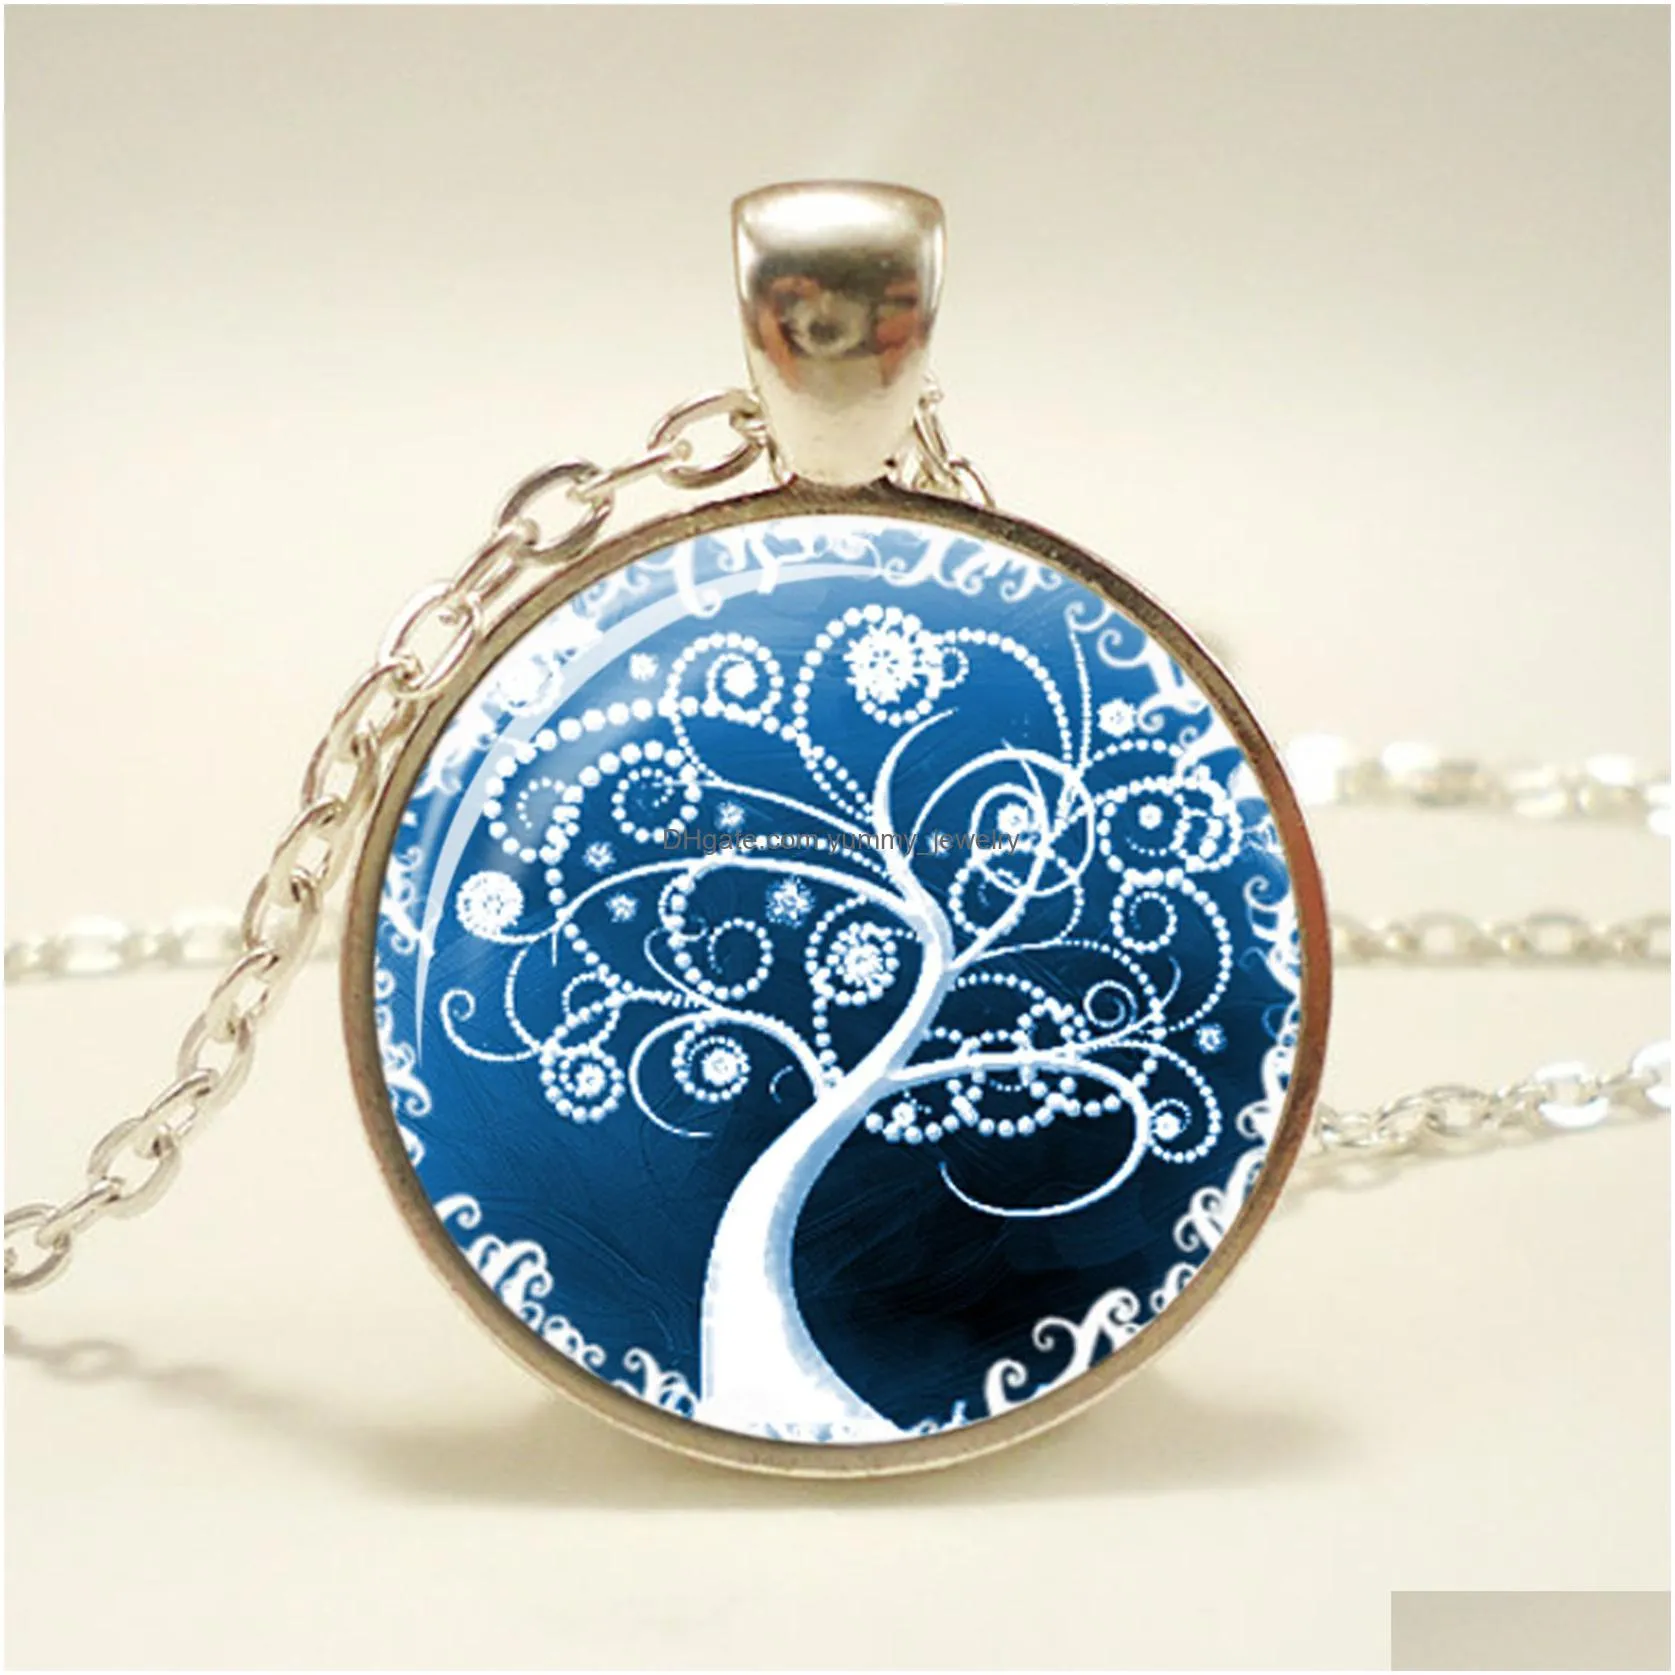 fashion life tree pendant necklace vintage silver color long chain necklace in jewelry classic glass cabochon necklace